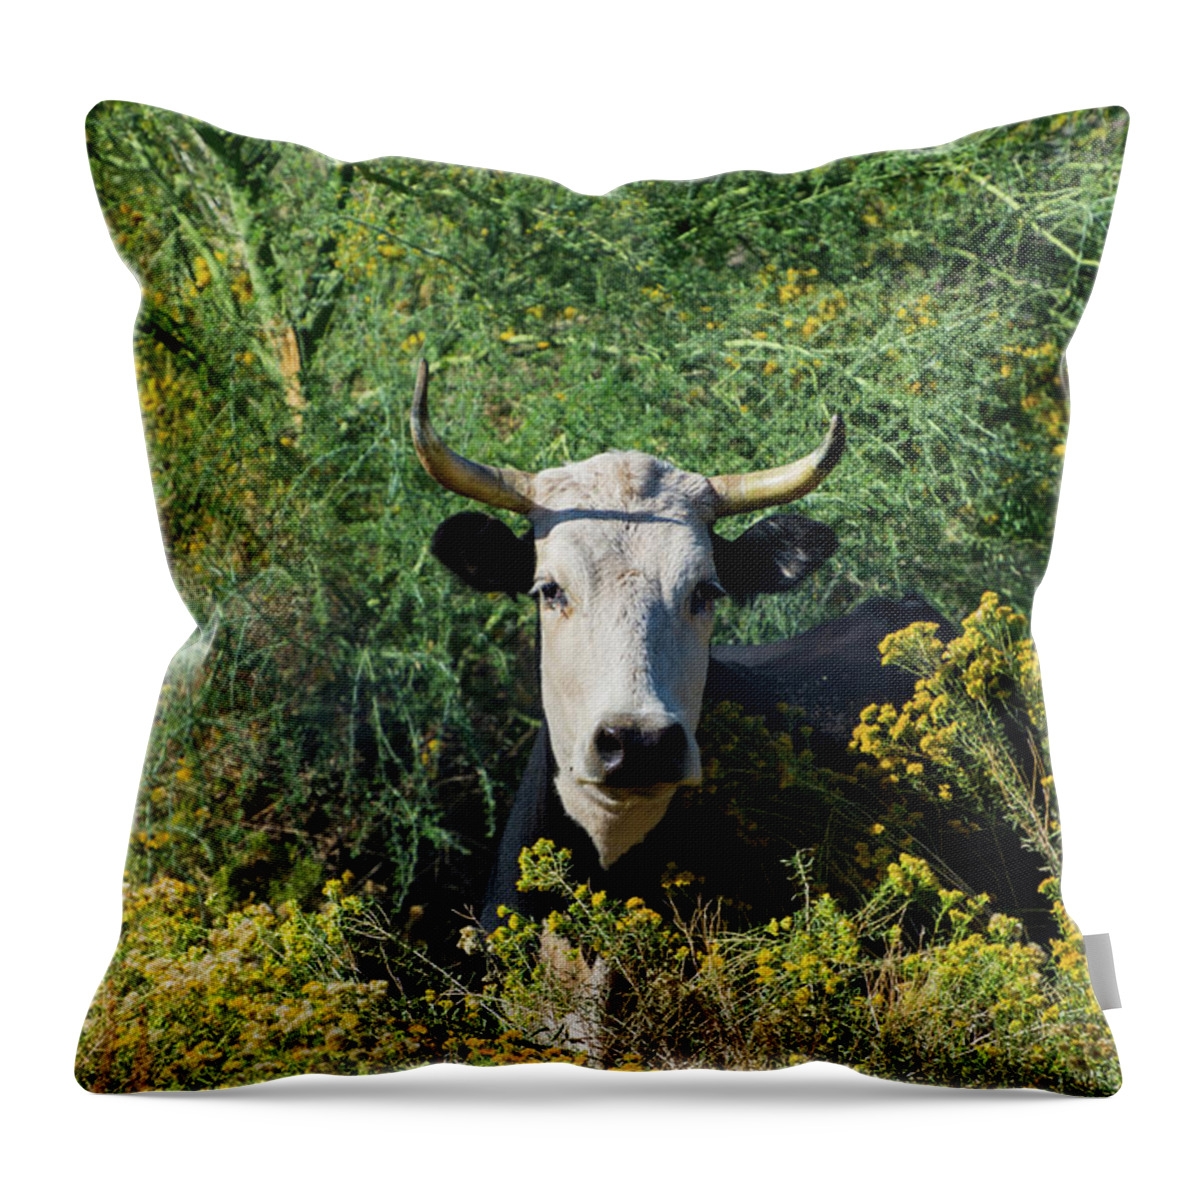 Moo Throw Pillow featuring the photograph I Picked These For Moo by Douglas Killourie